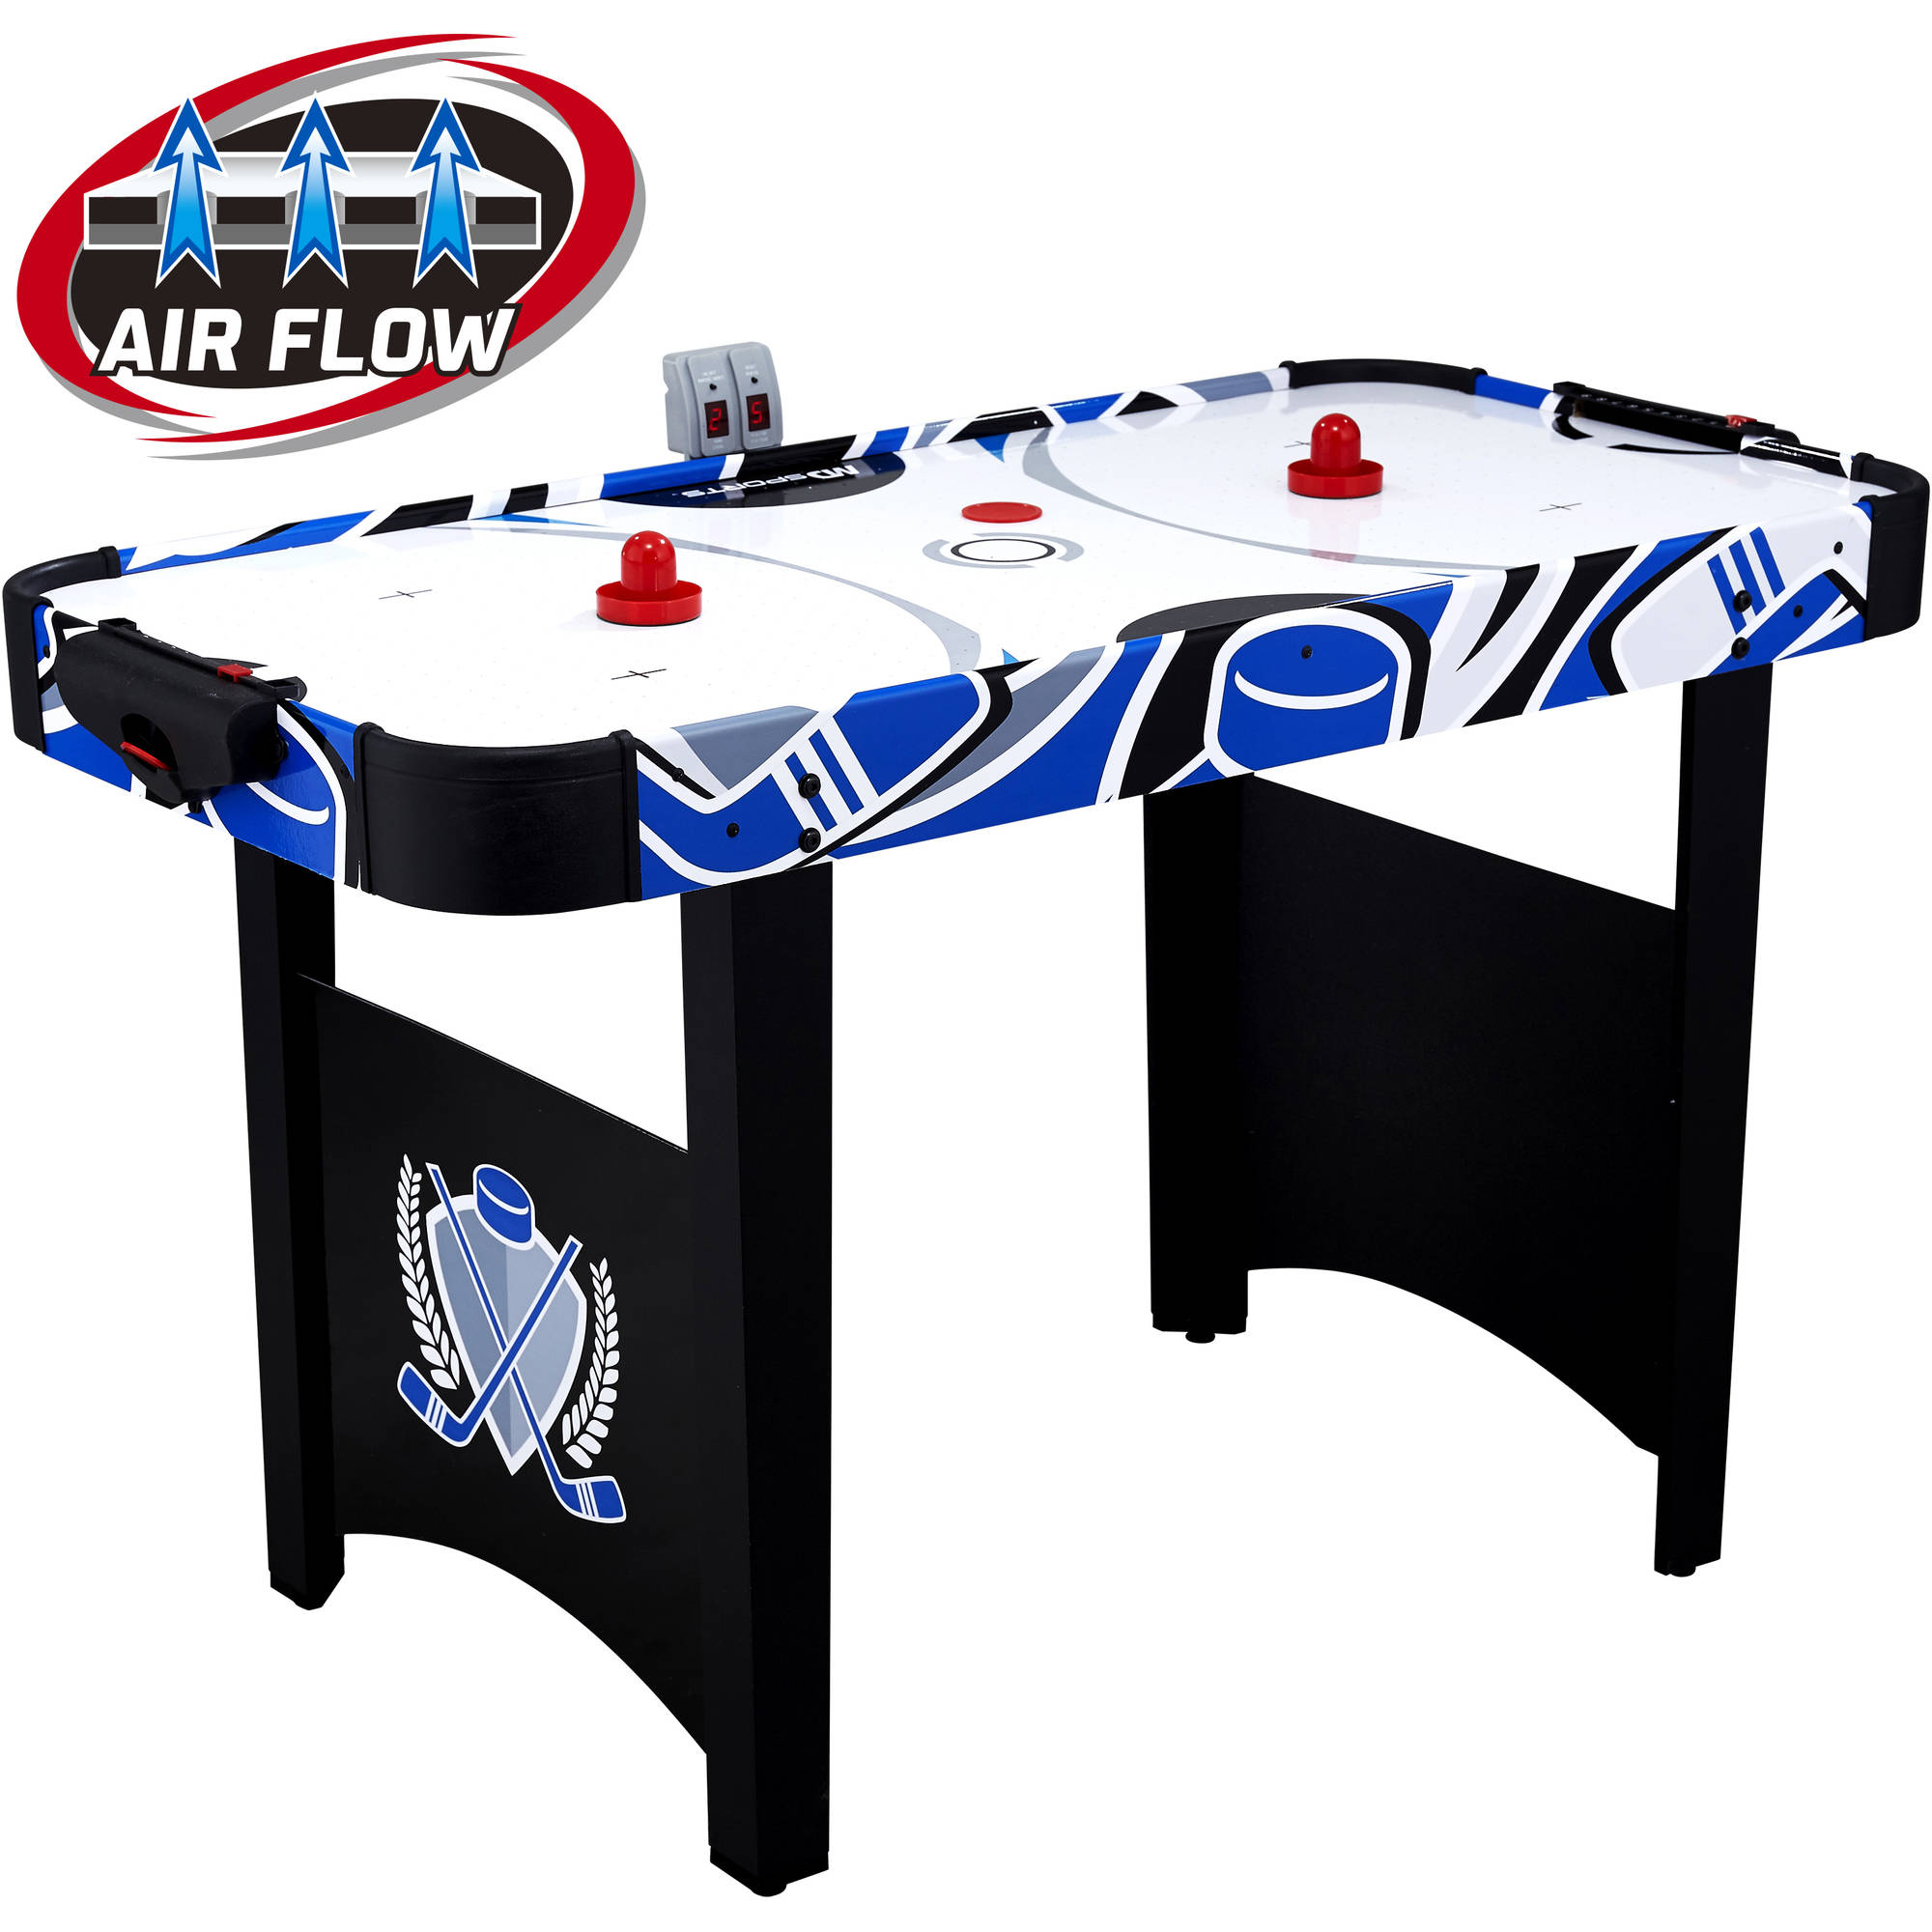 MD Sports 48-inch air-powered hockey table for $34